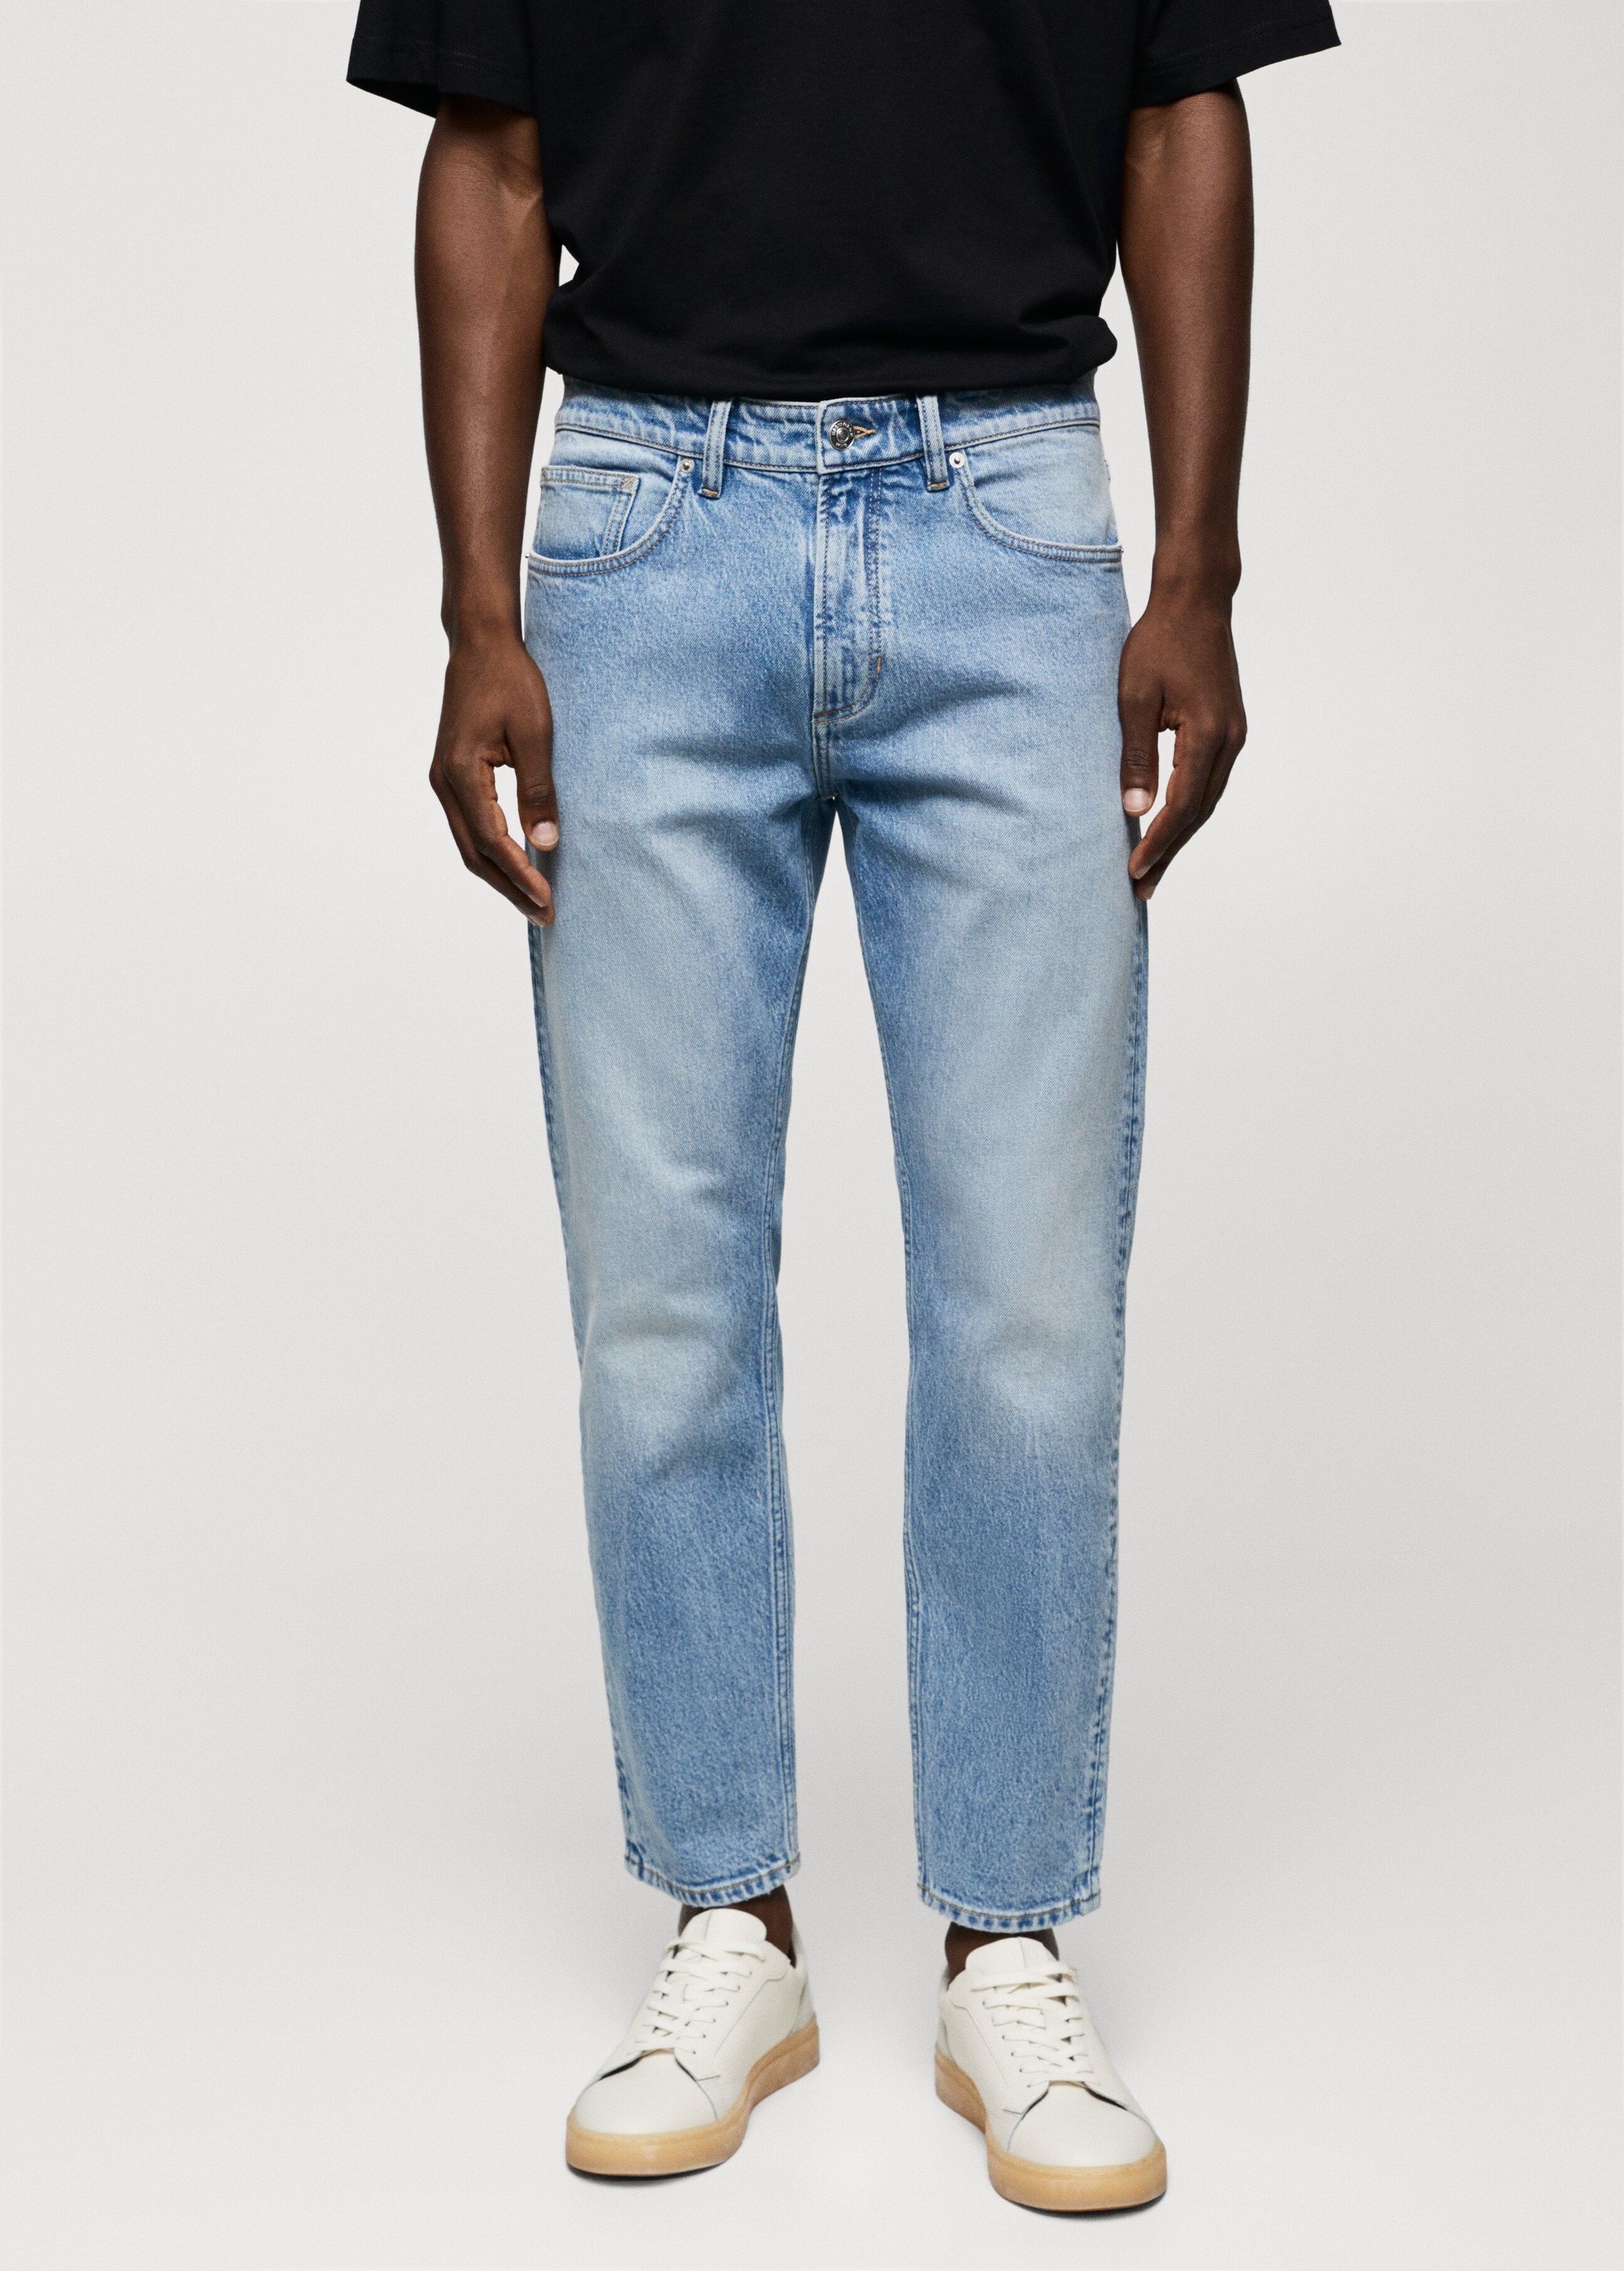 Texans Ben tapered cropped - Pla mig